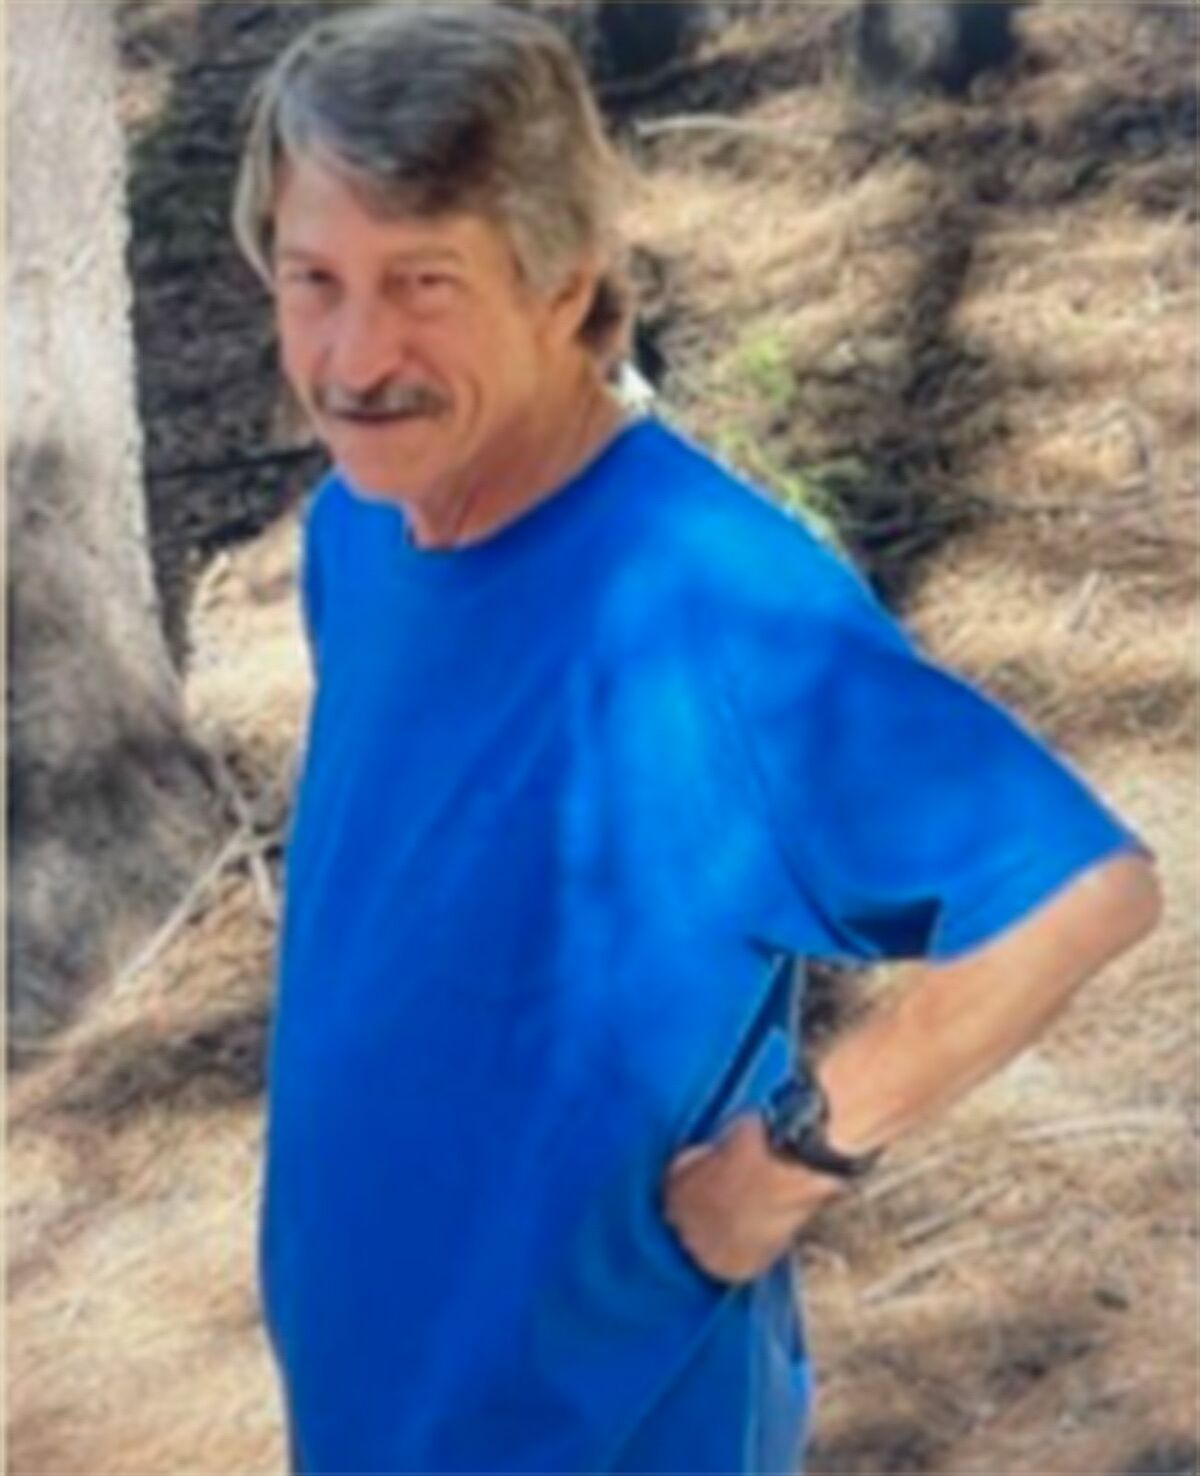 A missing 63-year-old hiker was found dead - Los Angeles Times